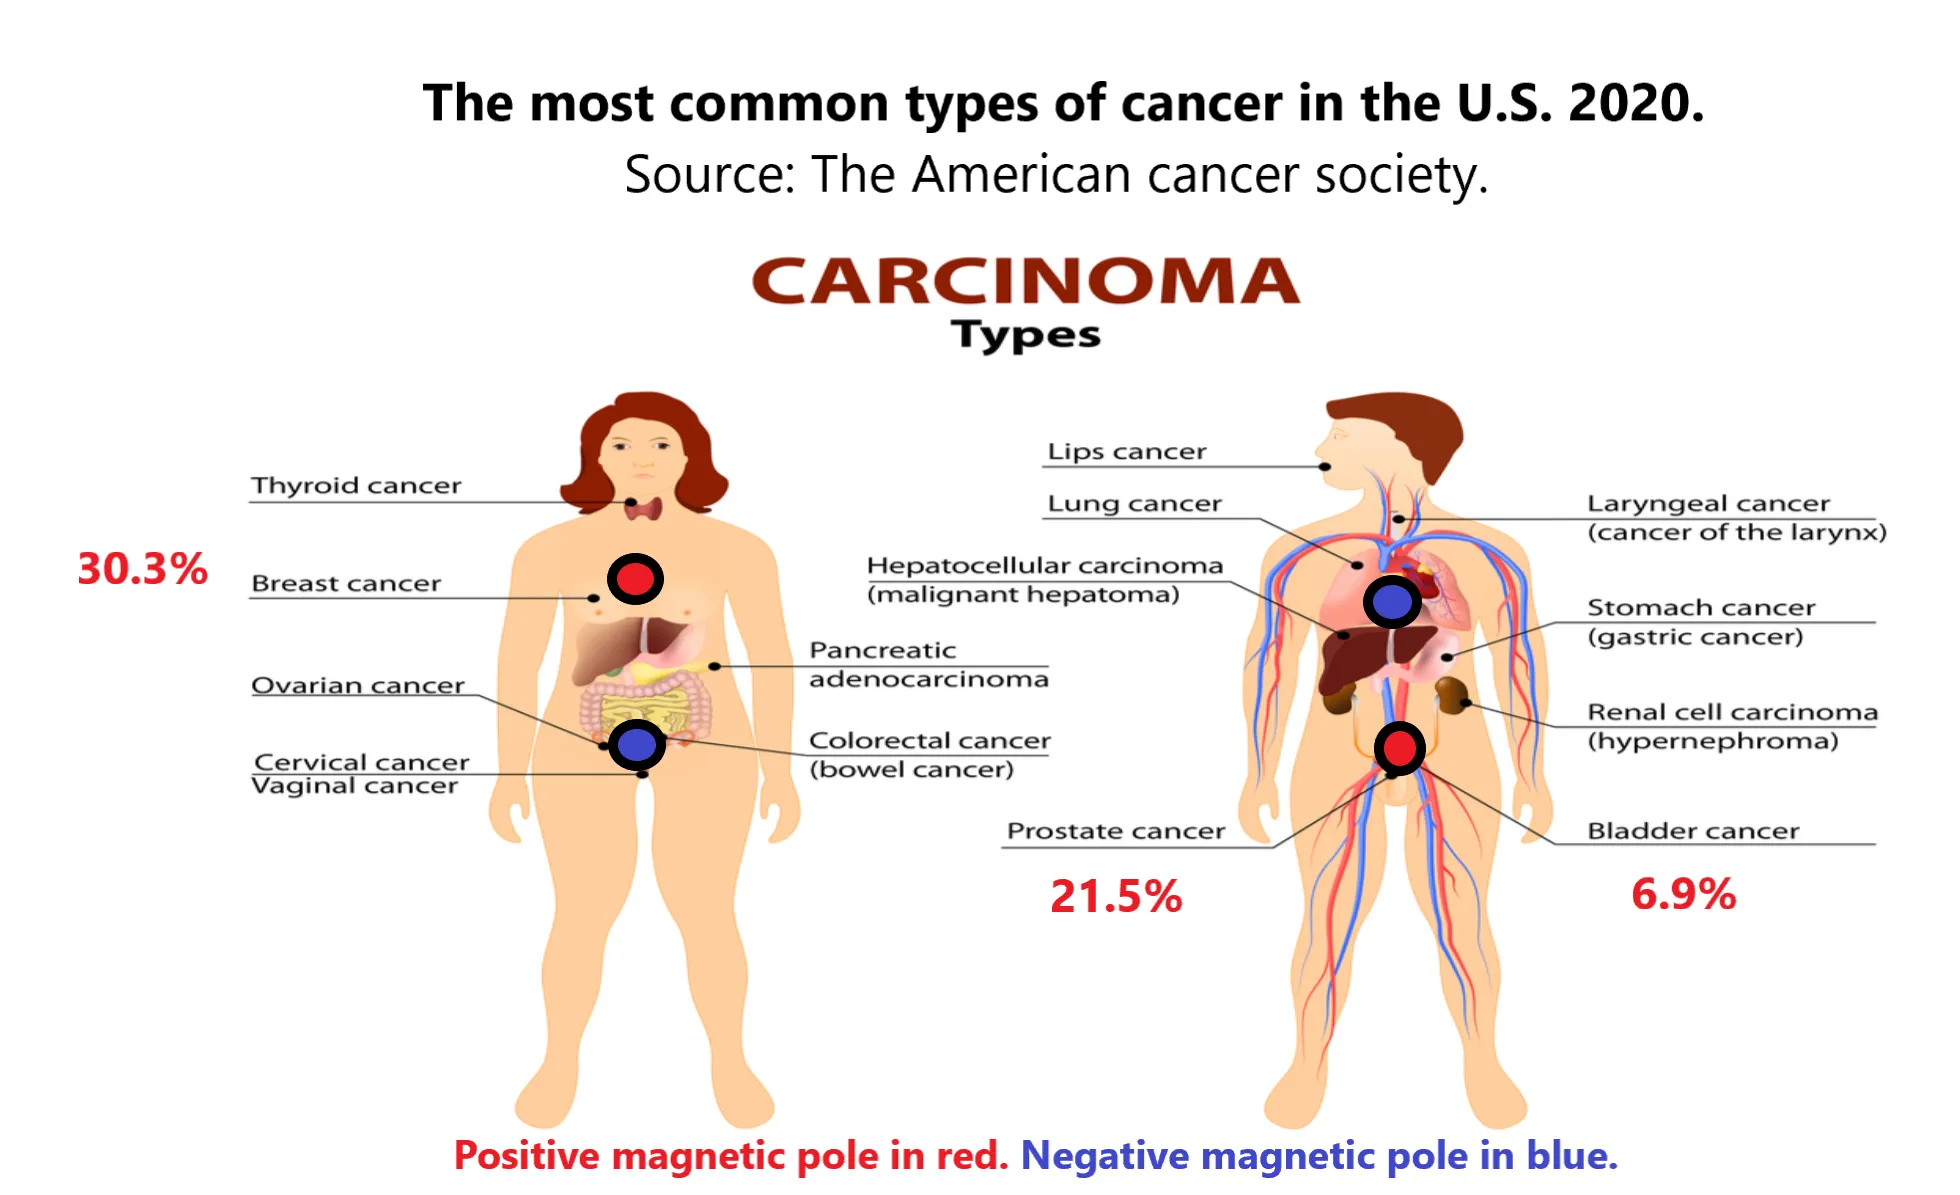 The most common types of cancer in the U.S. 2020